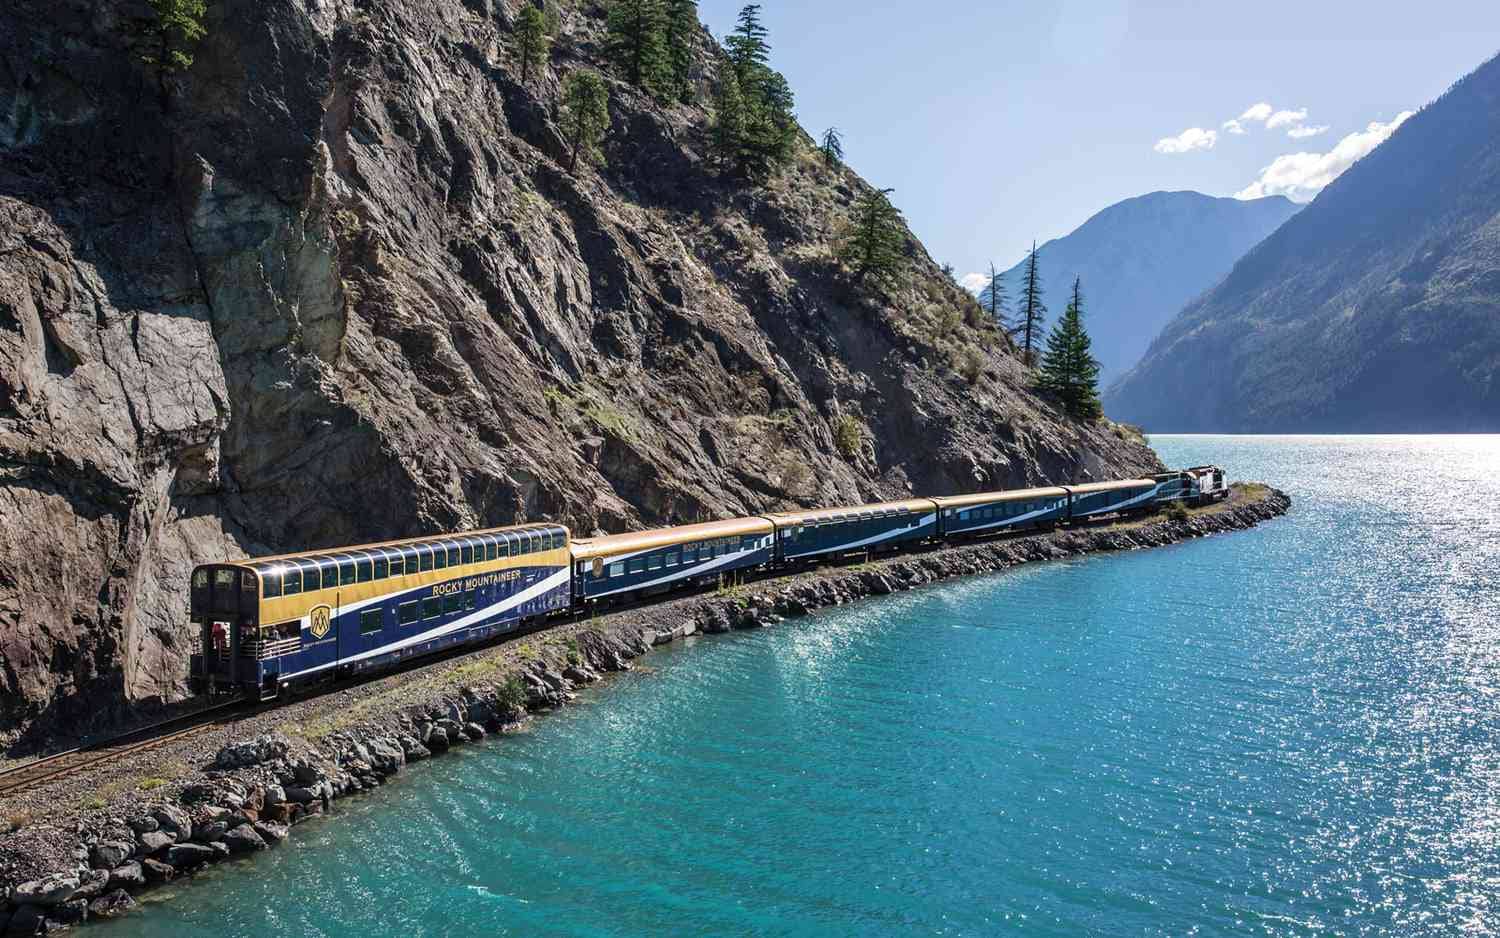 Rocky Mountaineer: A Scenic Train Journey